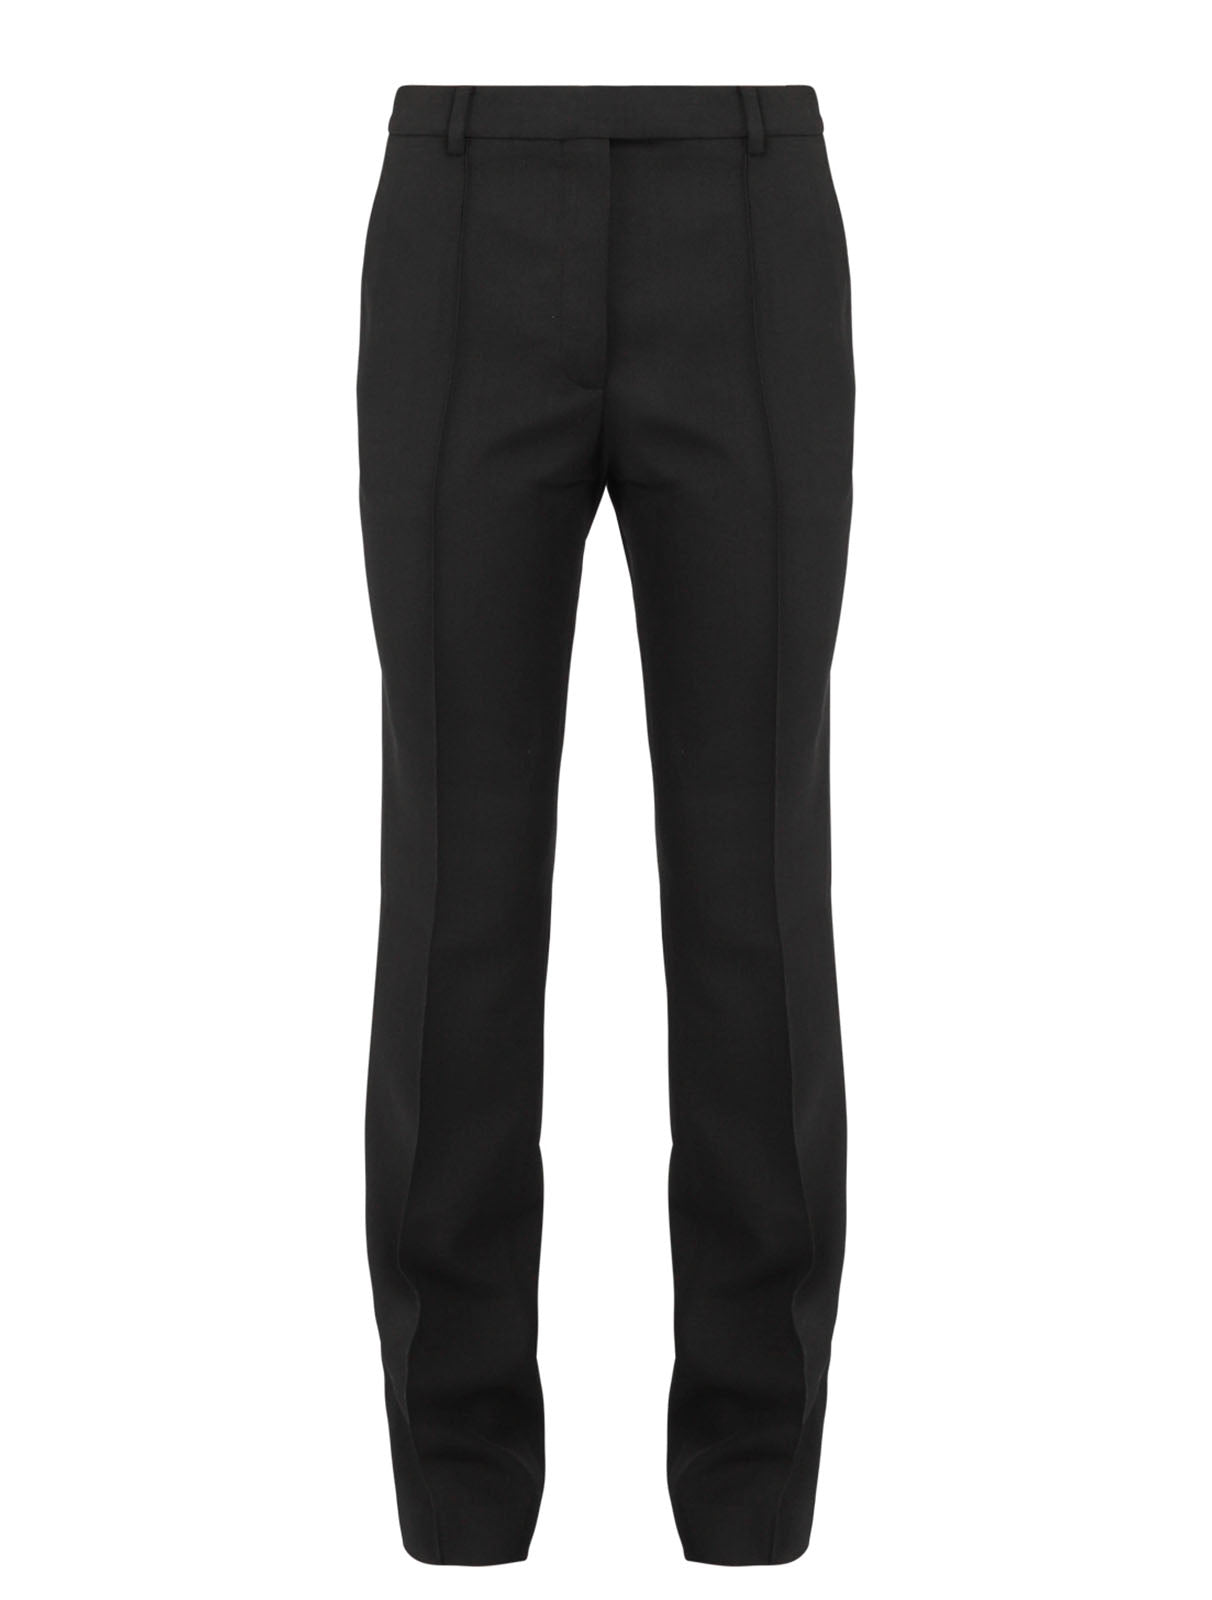 Narrow Tailored Trousers